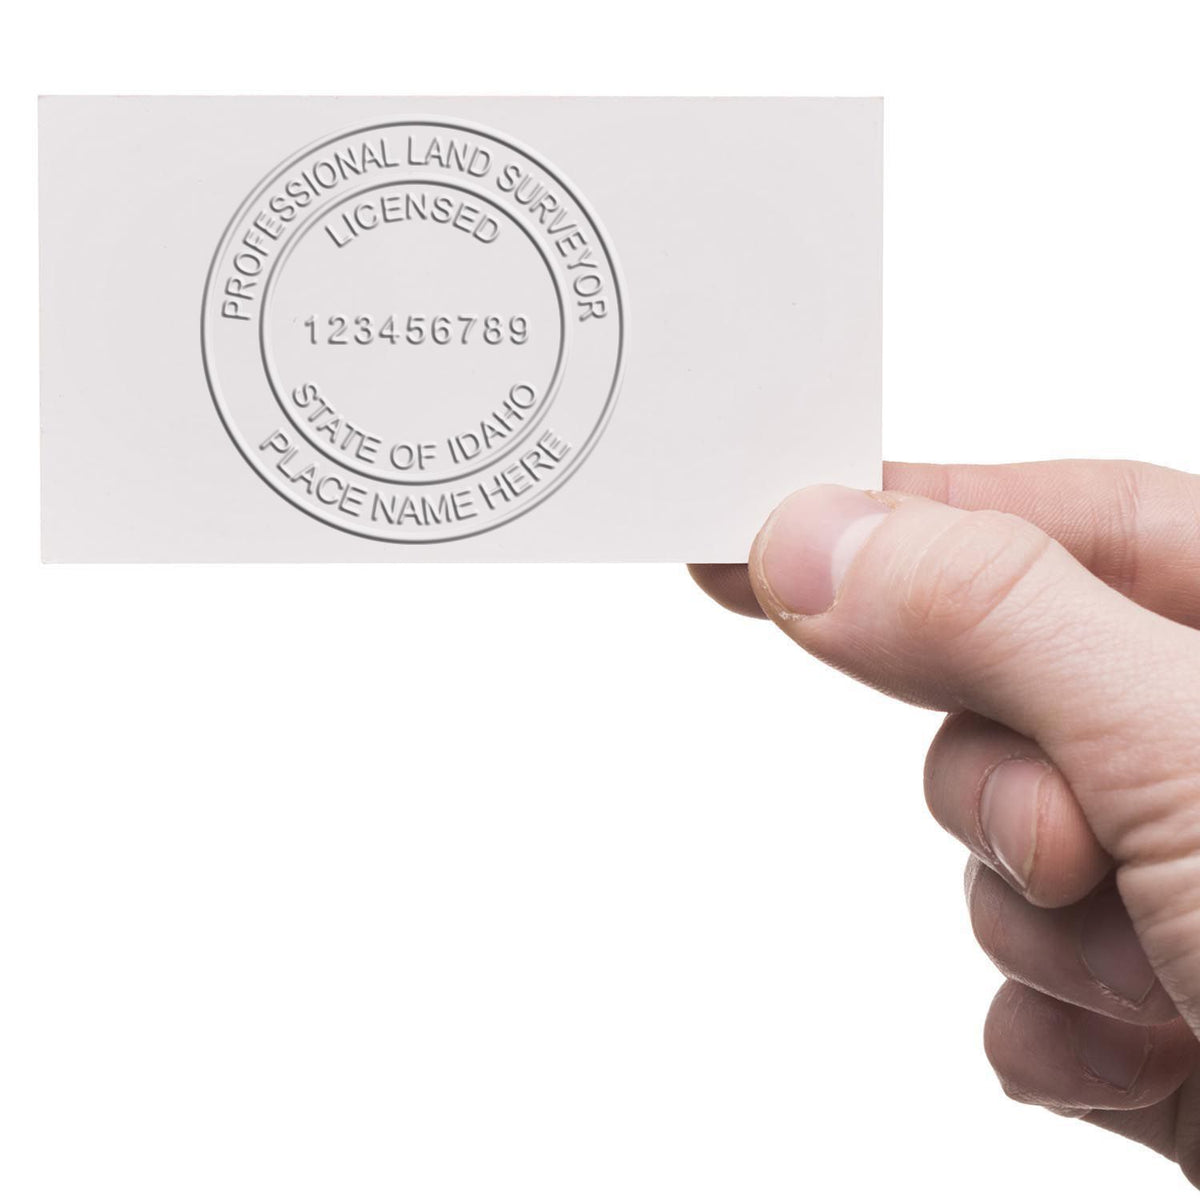 An alternative view of the Handheld Idaho Land Surveyor Seal stamped on a sheet of paper showing the image in use